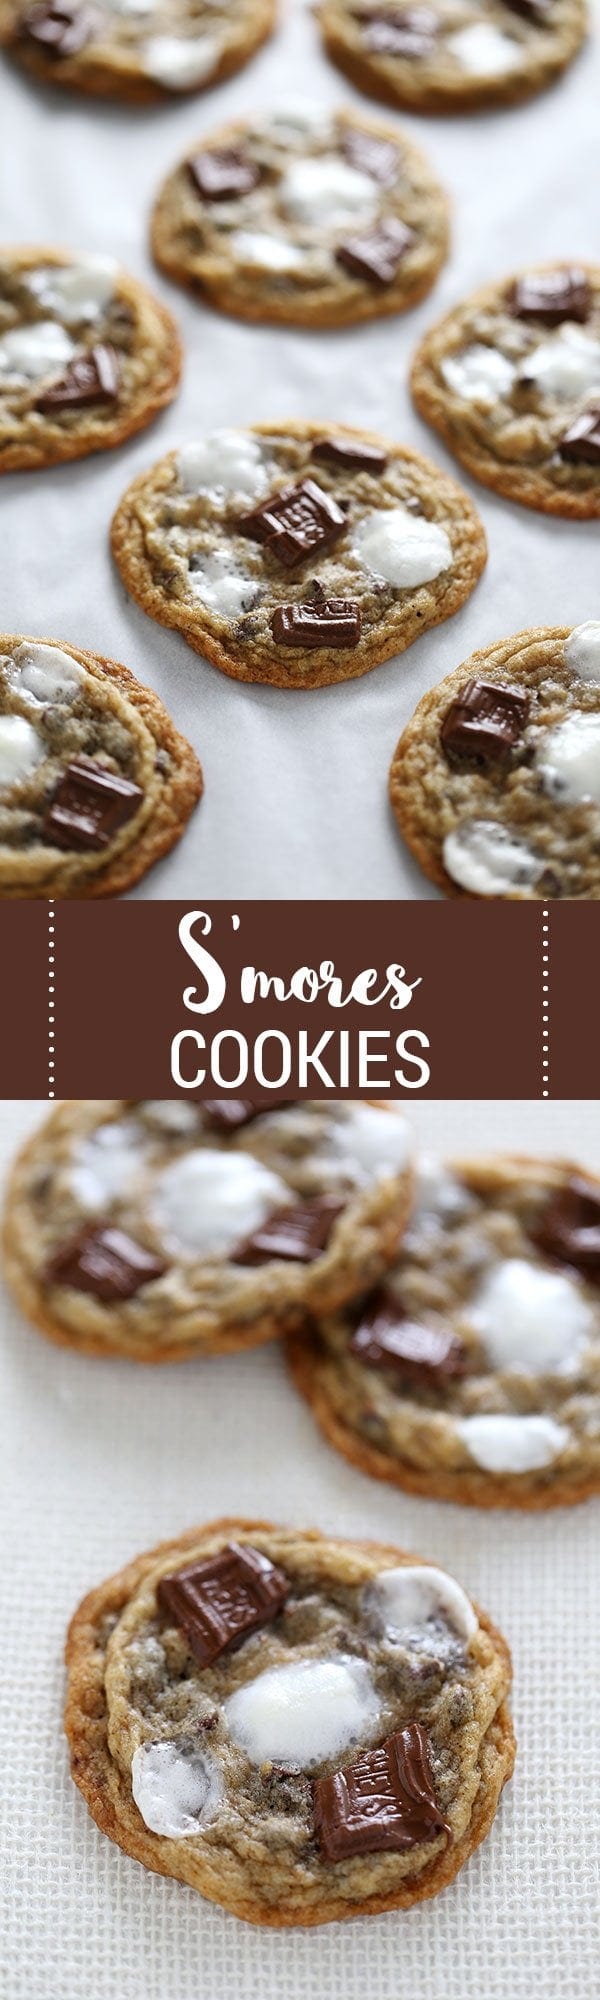 You're going to LOVE these adorable S'mores Cookies loaded with graham cracker crumbs, mini marshmallows, and gooey bits of Hershey's chocolate.